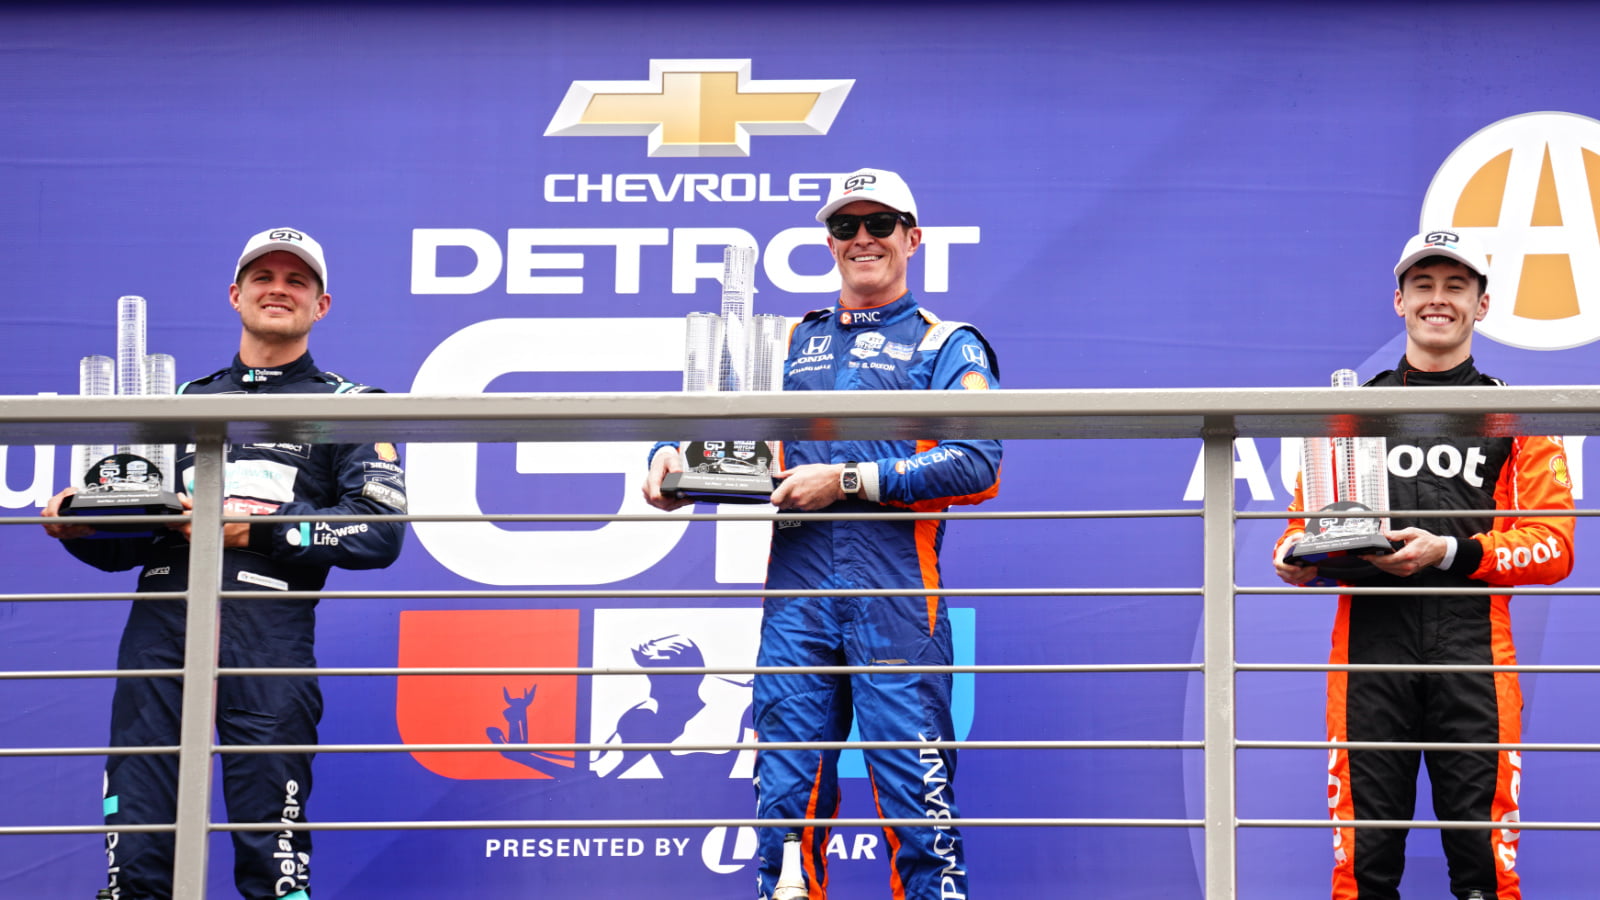 Dixon Clinches Victory in Thrilling Detroit GP Marred by Crashes